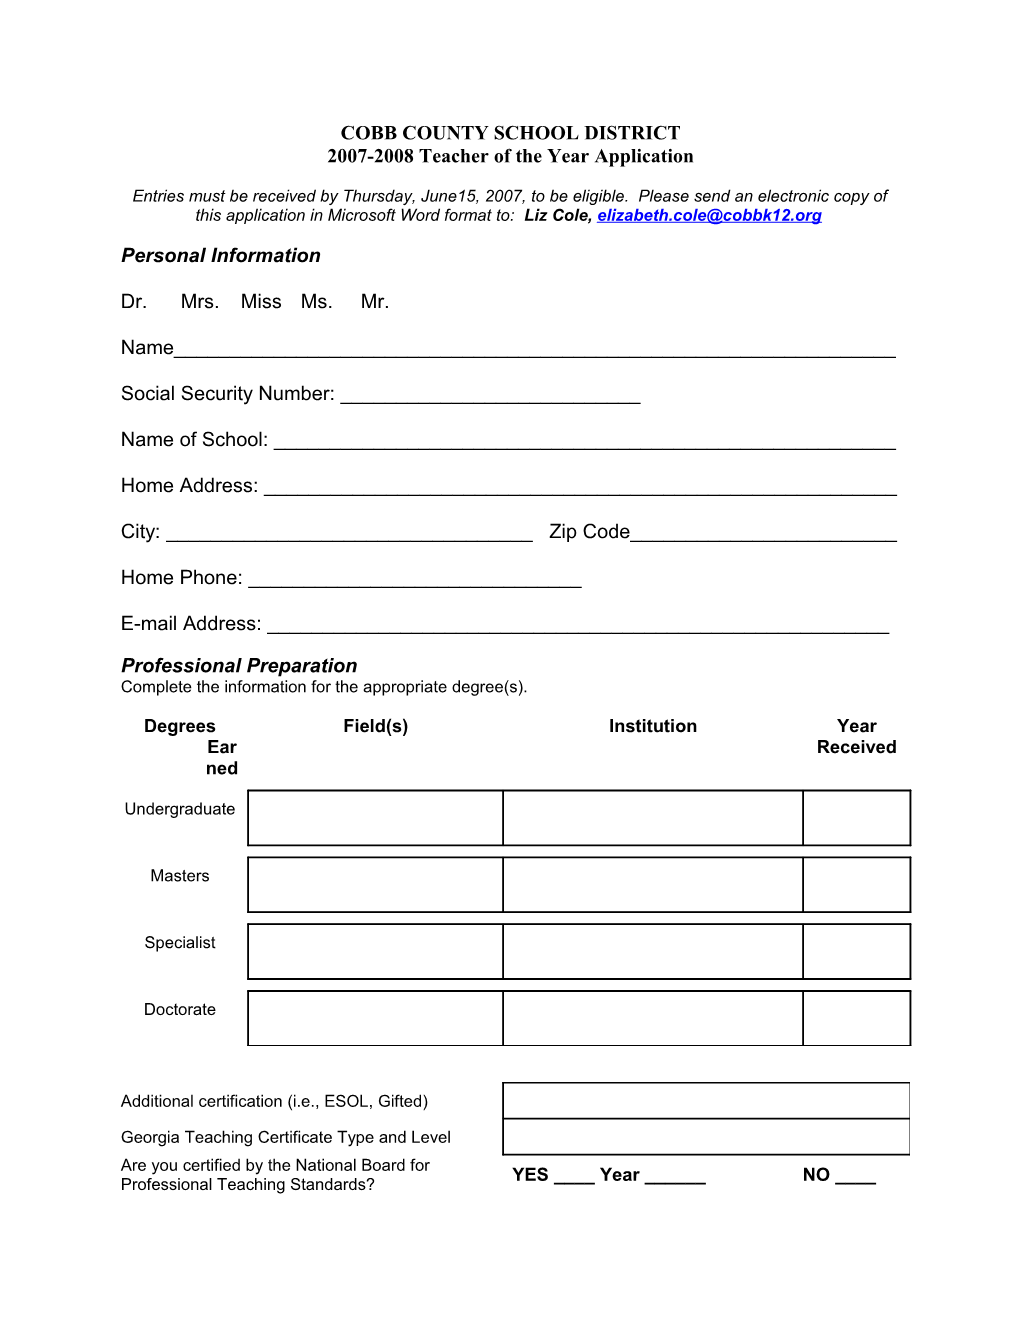 2007-2008 Teacher of the Year Application